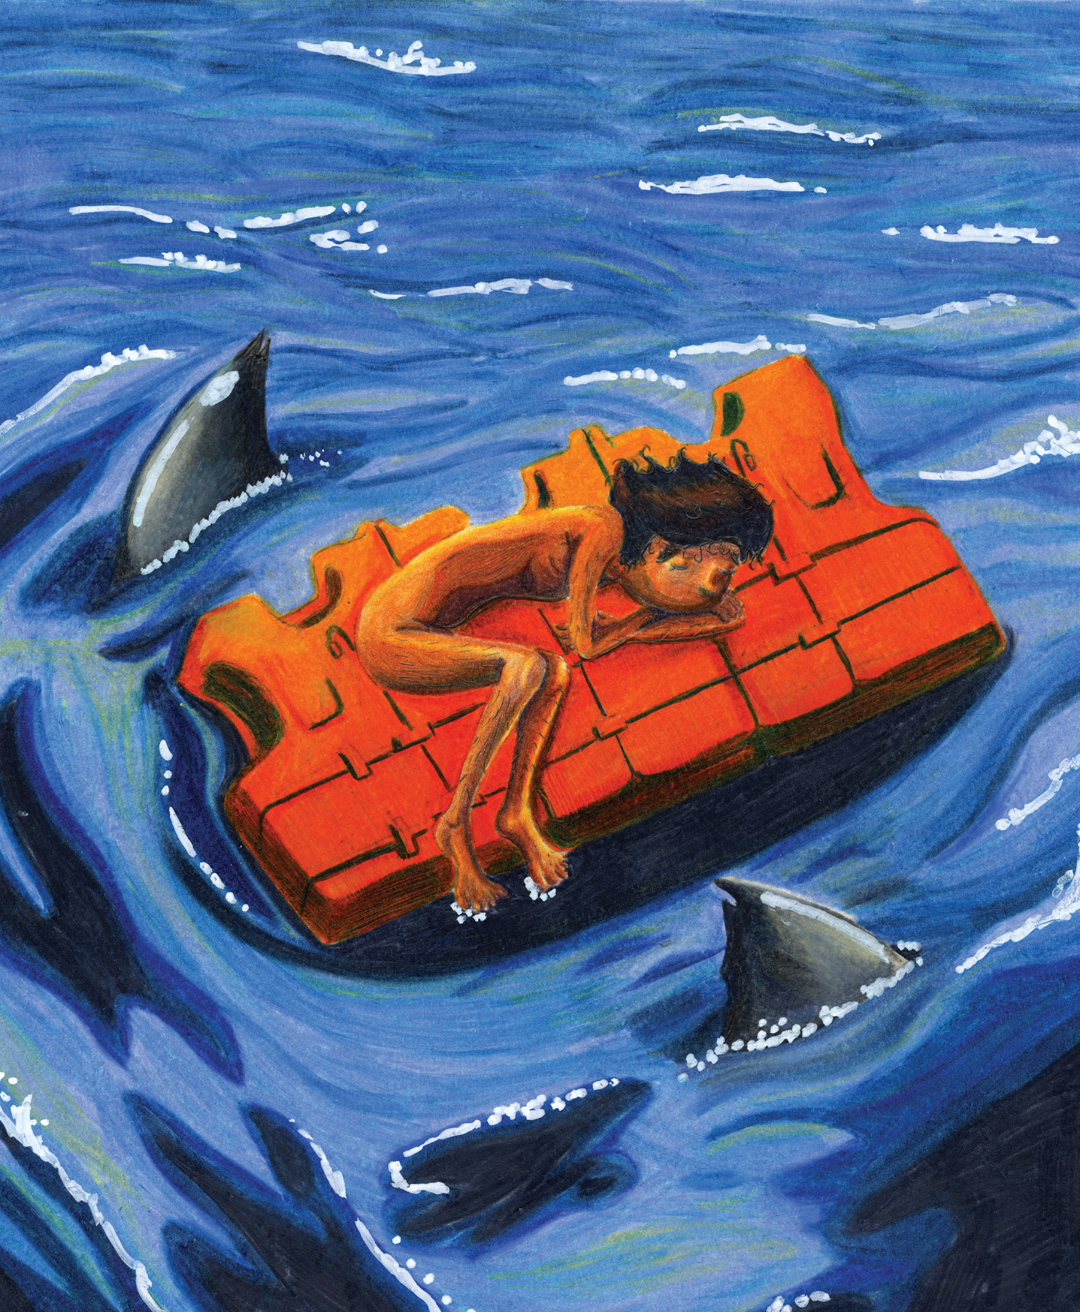 “Life of Pi”. Image from a series illustrated for “Life of Pi” by Yann Martel. Pi lost at sea on a self-made raft. Further illustrations are on my website.